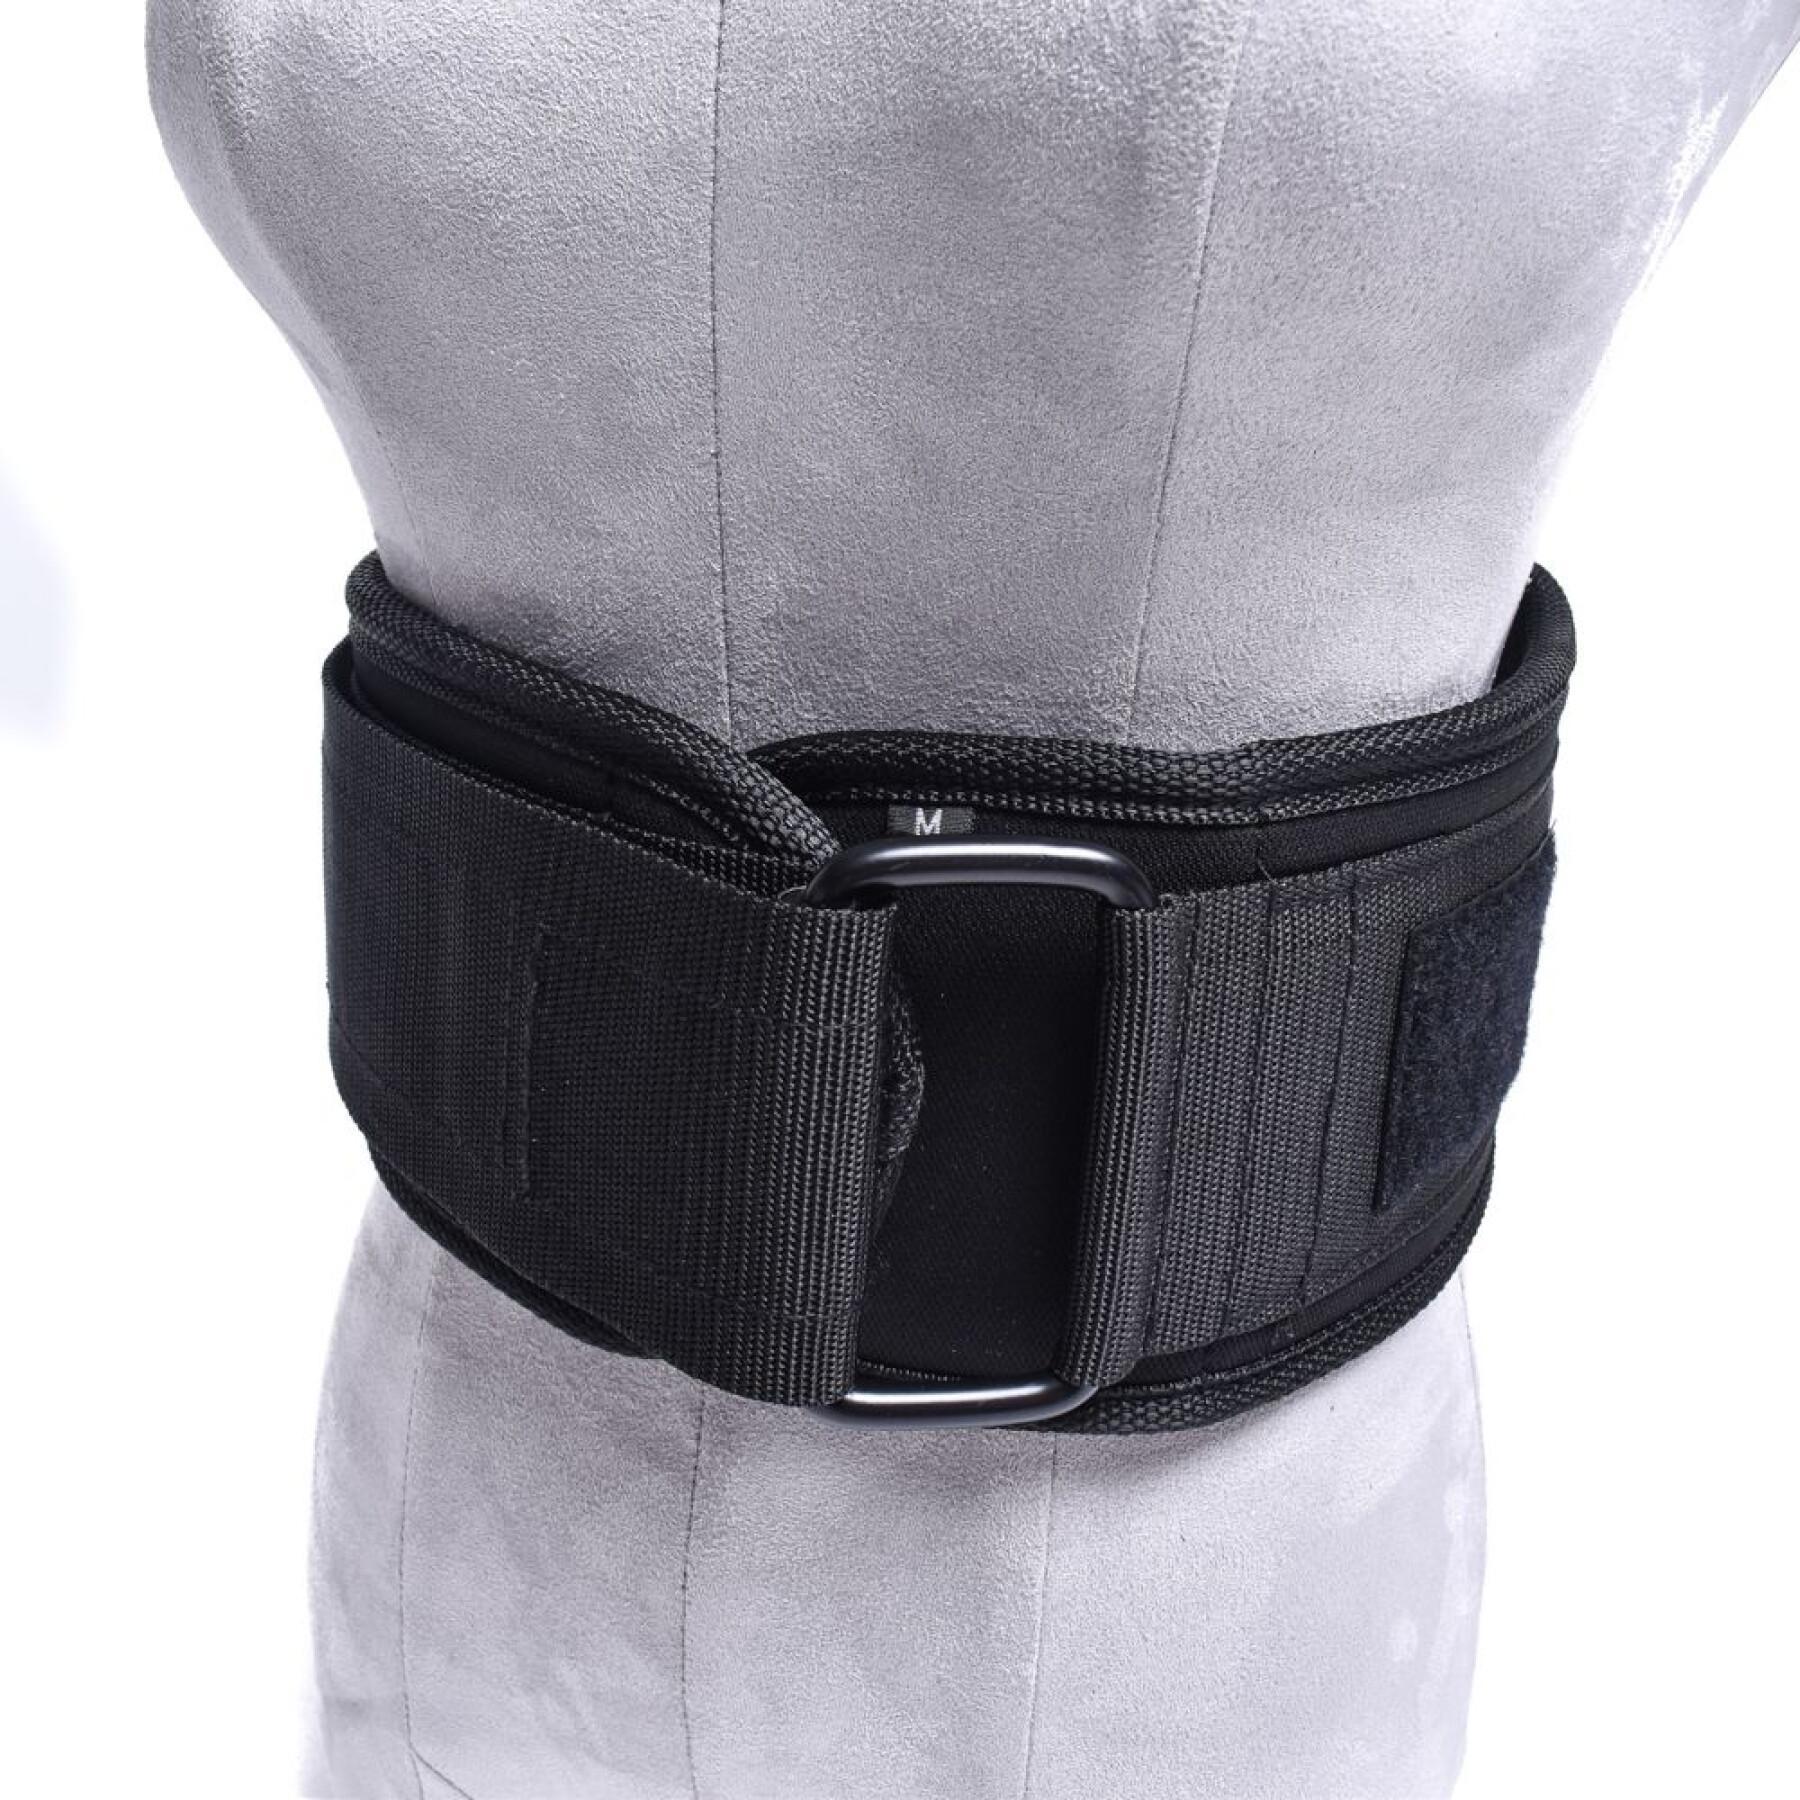 Weightlifting belt Booster Fight Gear Athletic Dept